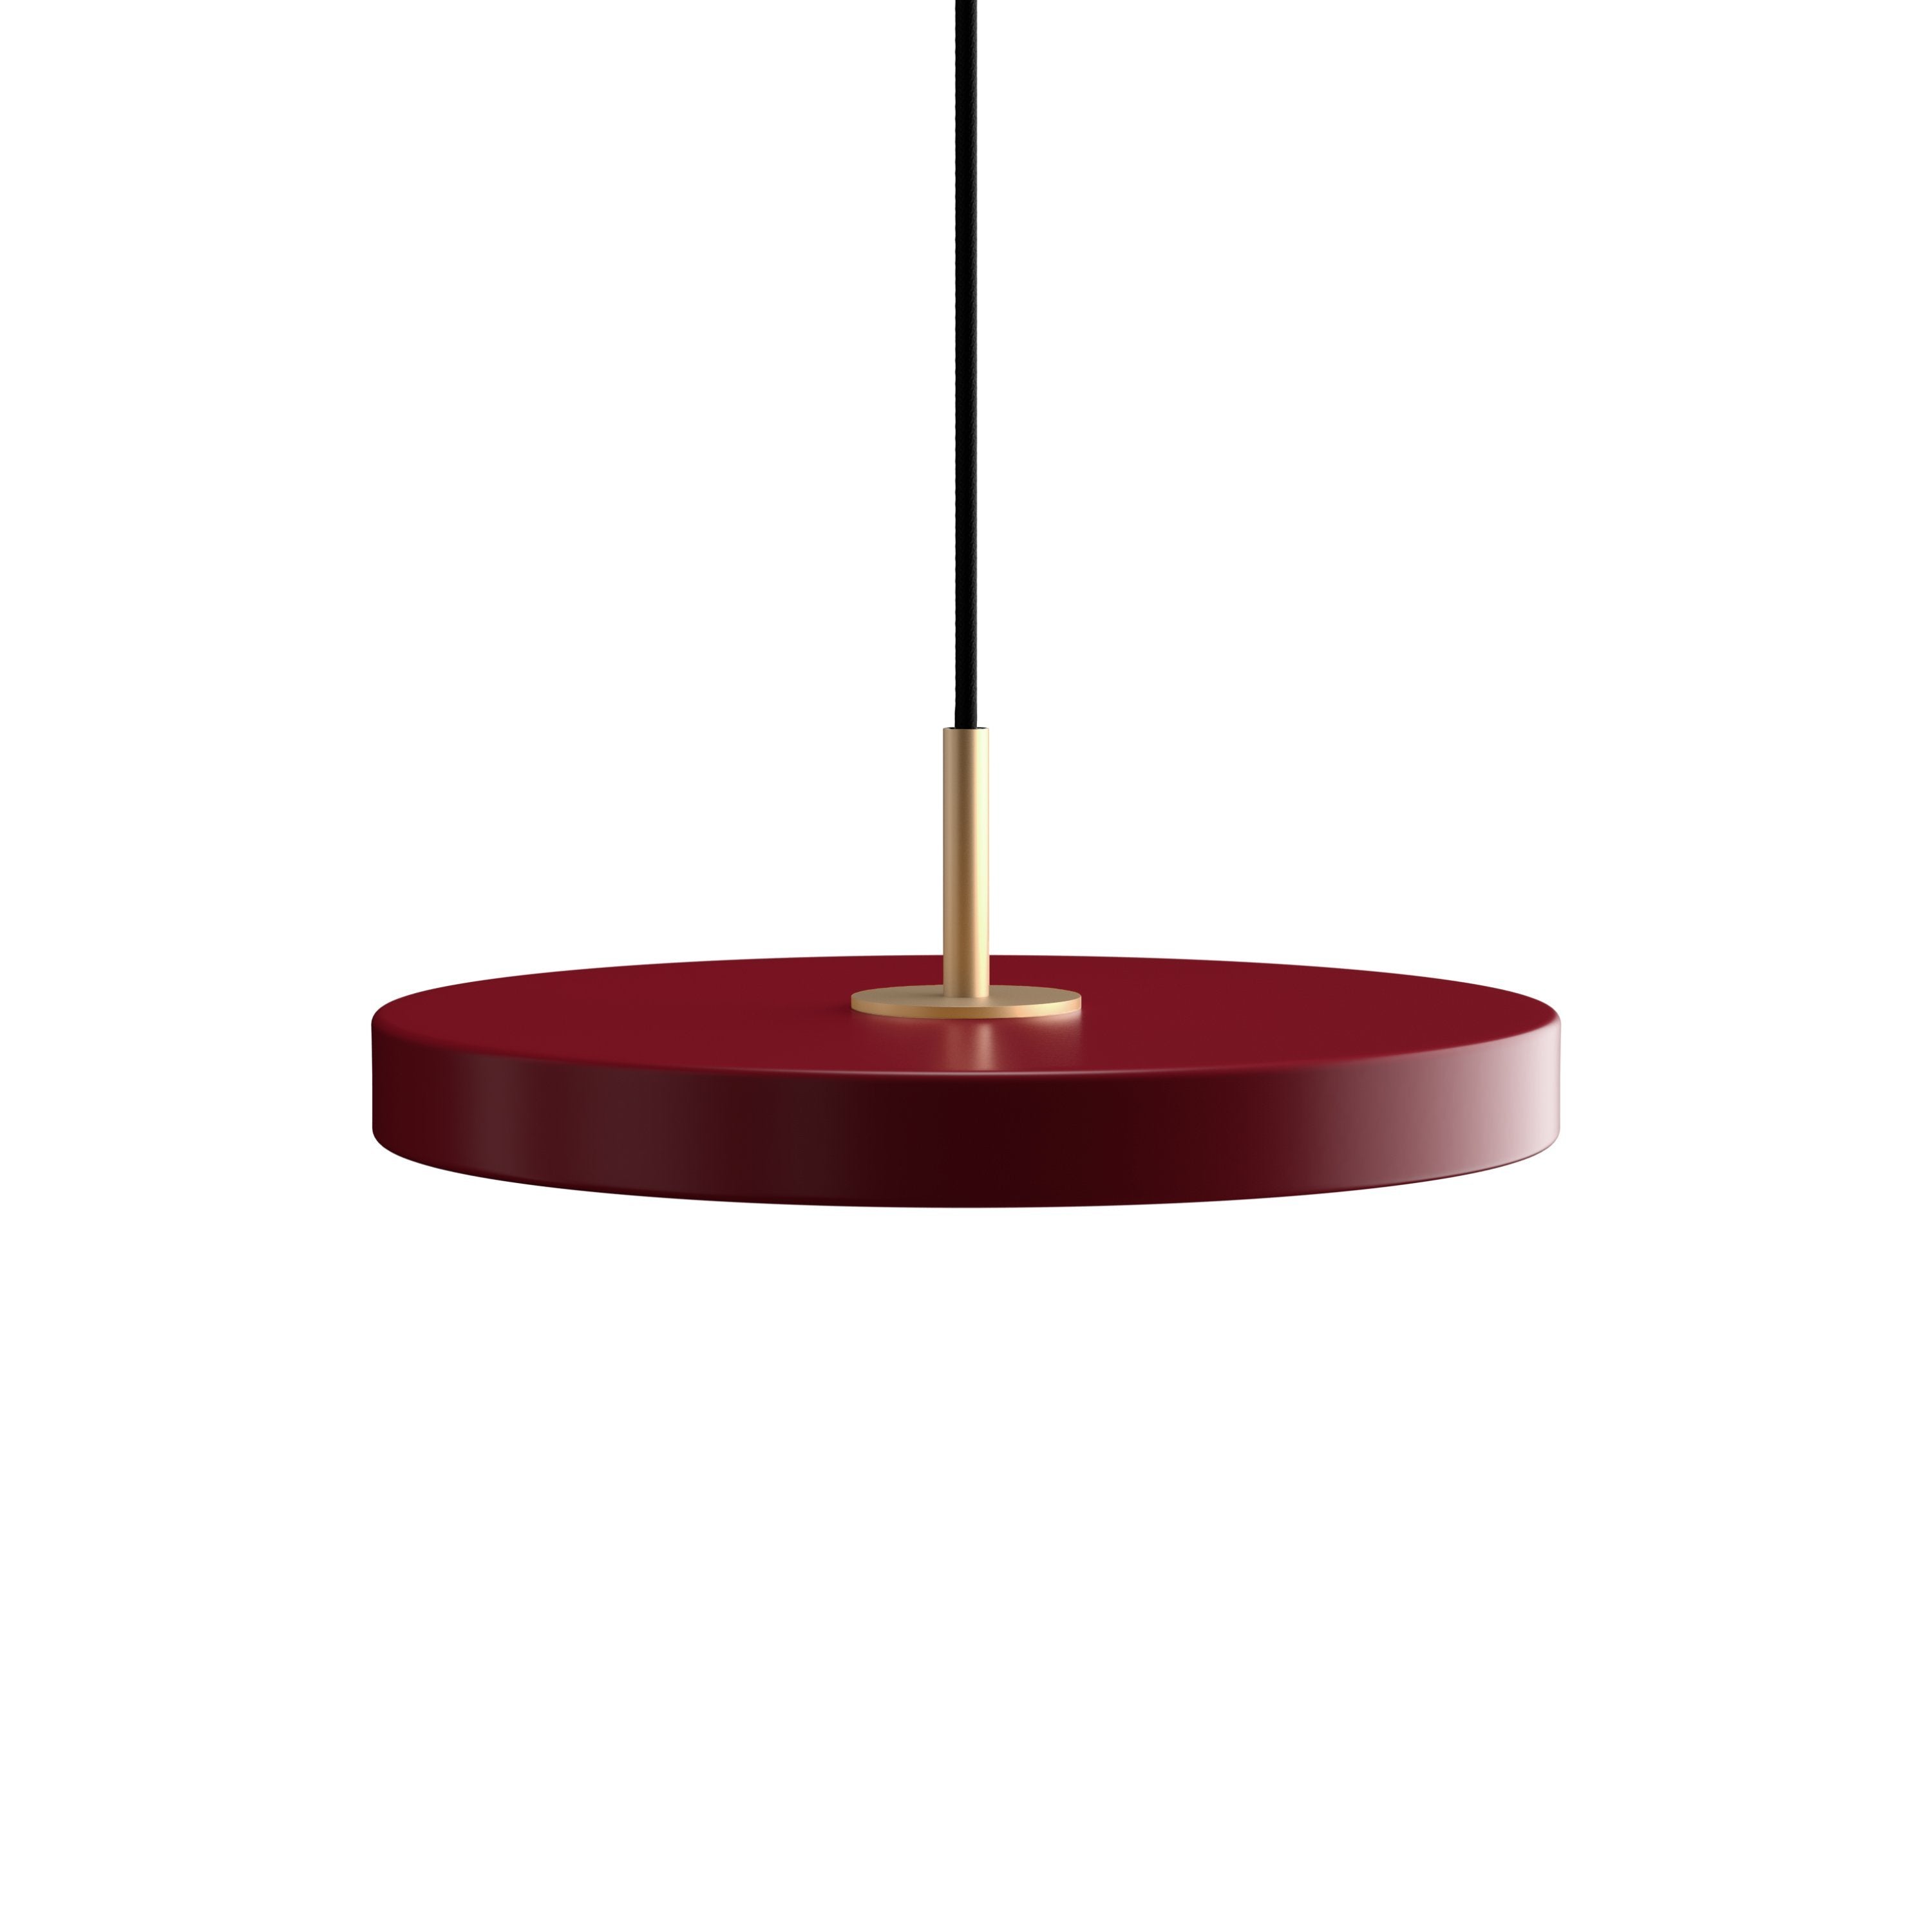 UMAGE ASTERIA MINI LABRINGS, RUBY RED